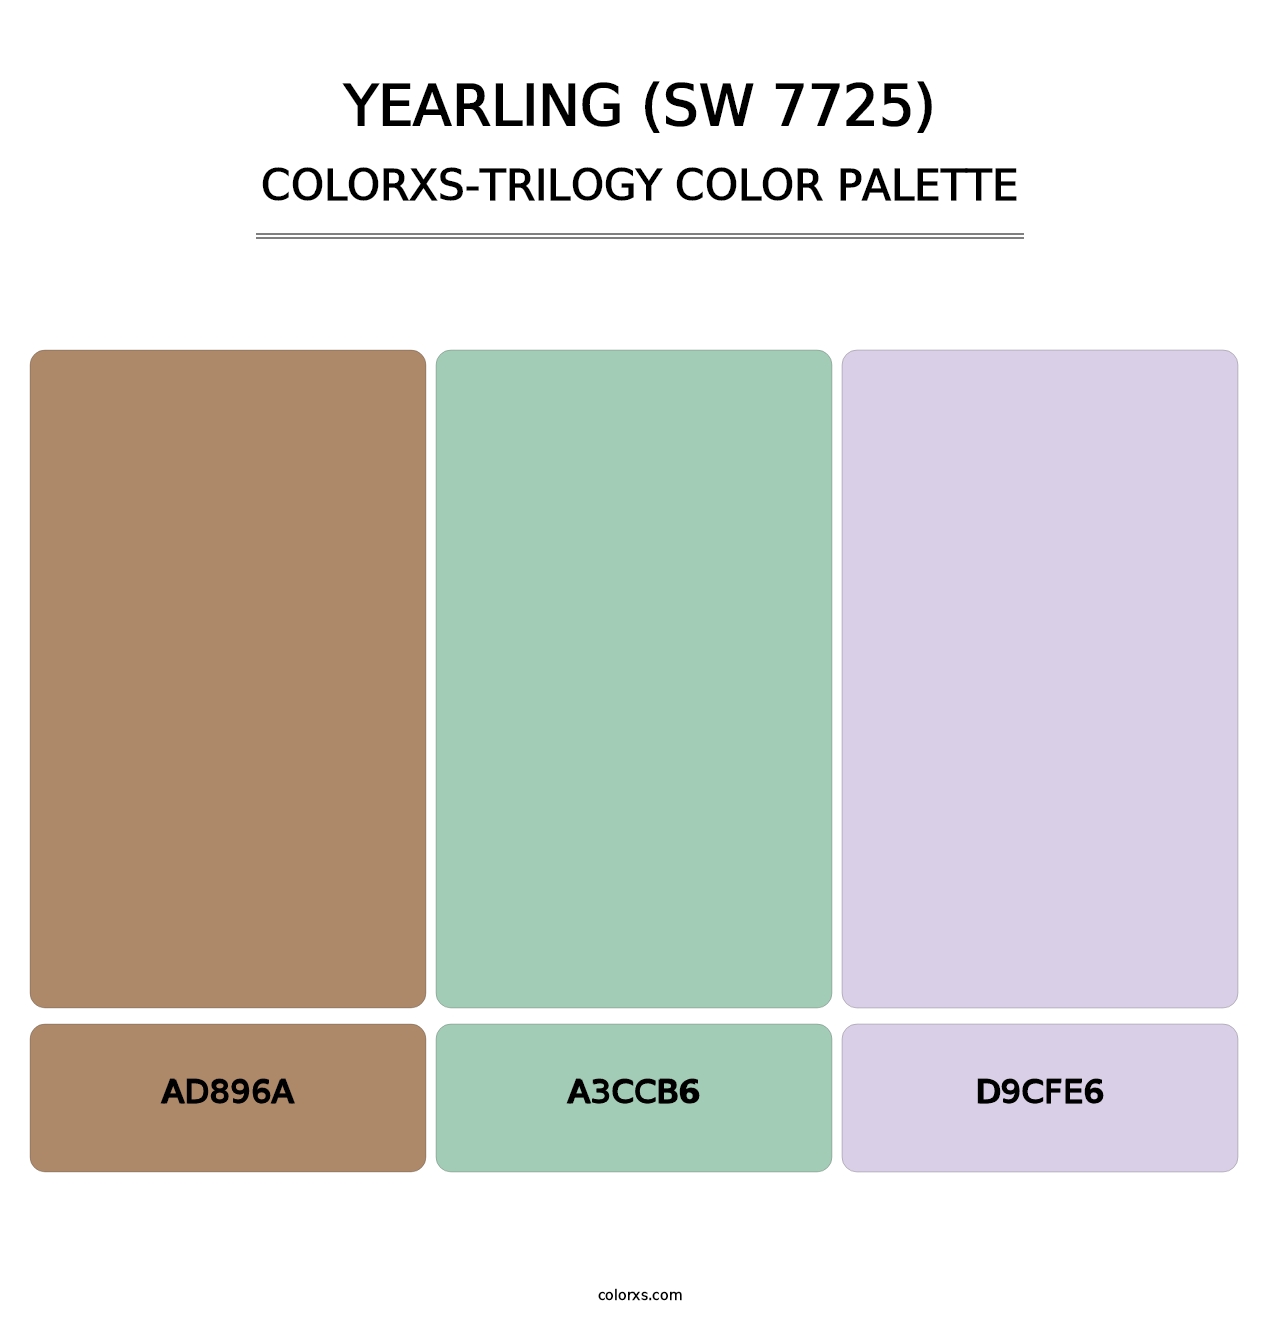 Yearling (SW 7725) - Colorxs Trilogy Palette